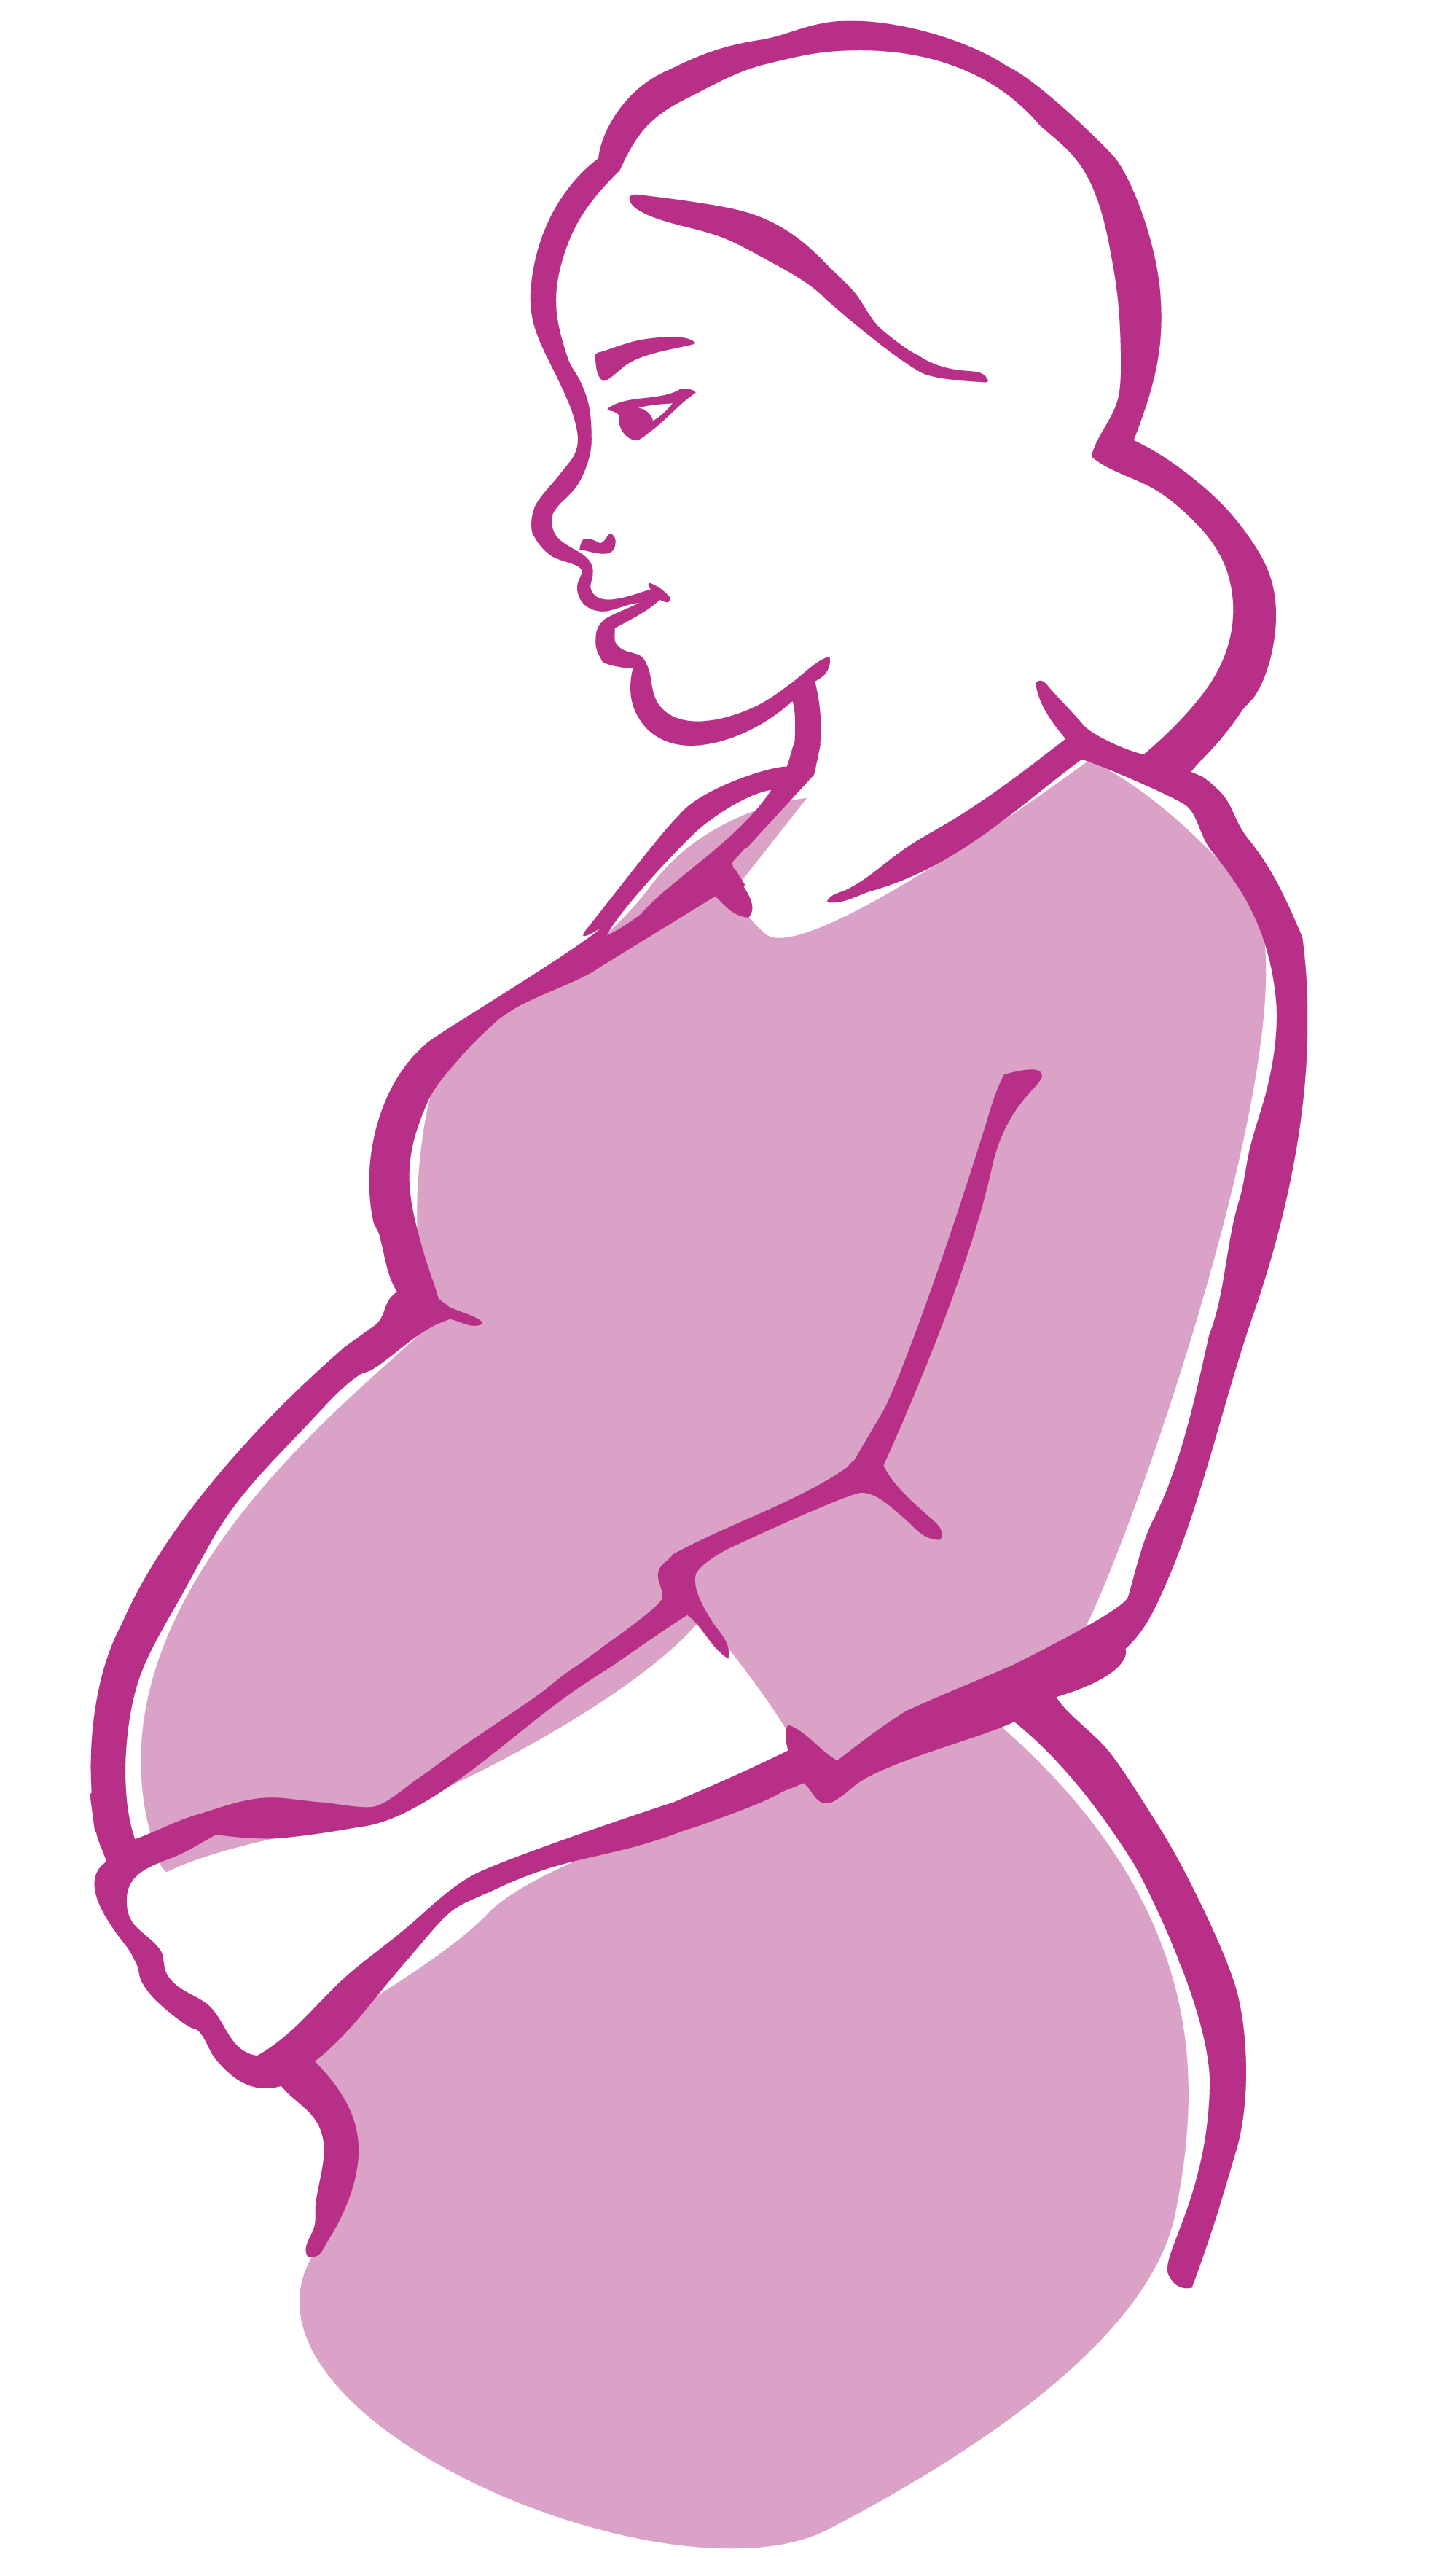 Mother clipart pregnant, Picture #1681319 mother clipart pregnant